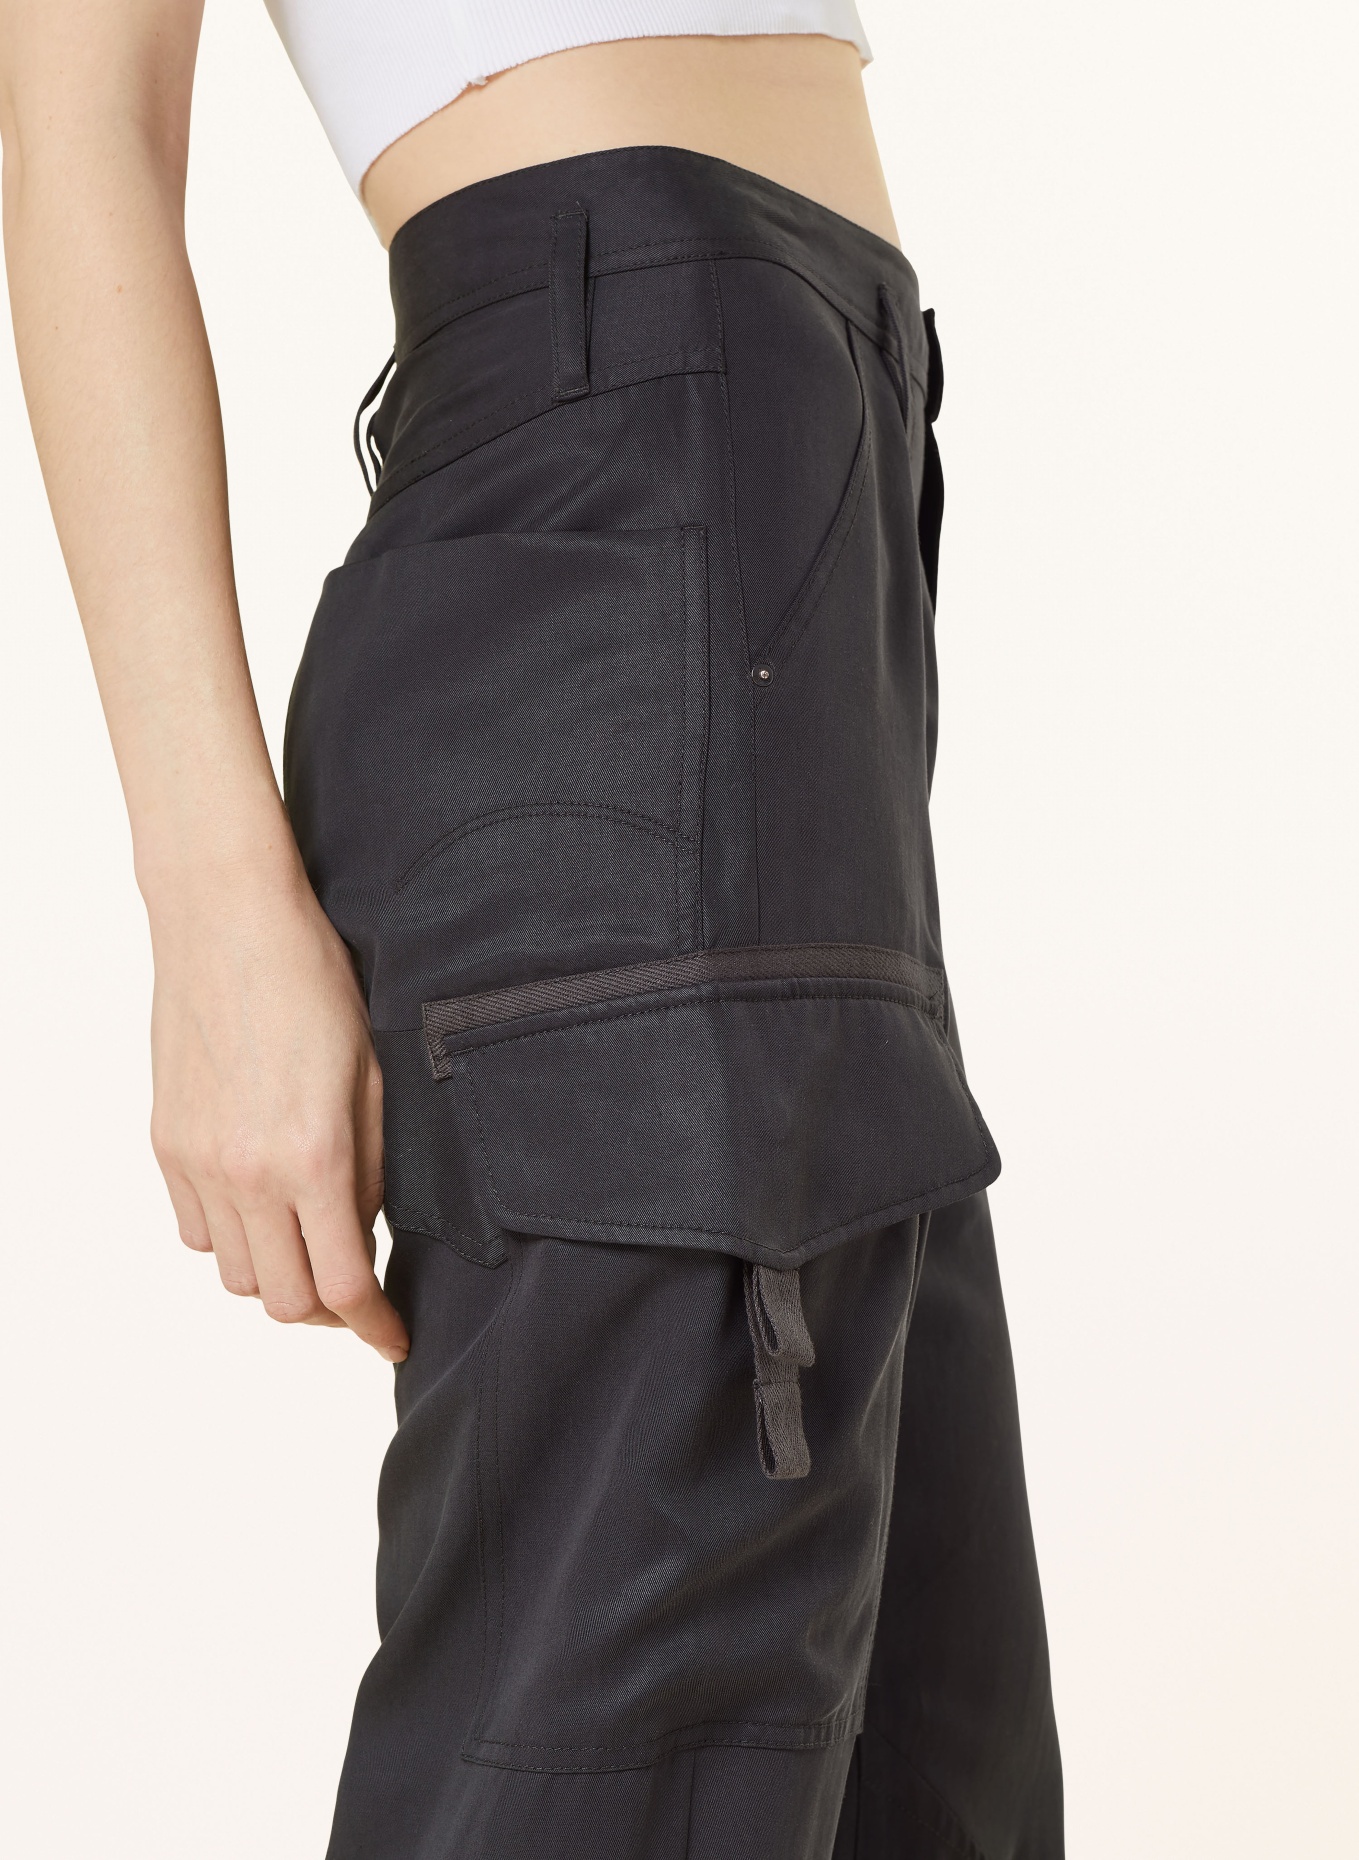 G-Star RAW Cargo pants, Color: GRAY (Image 5)